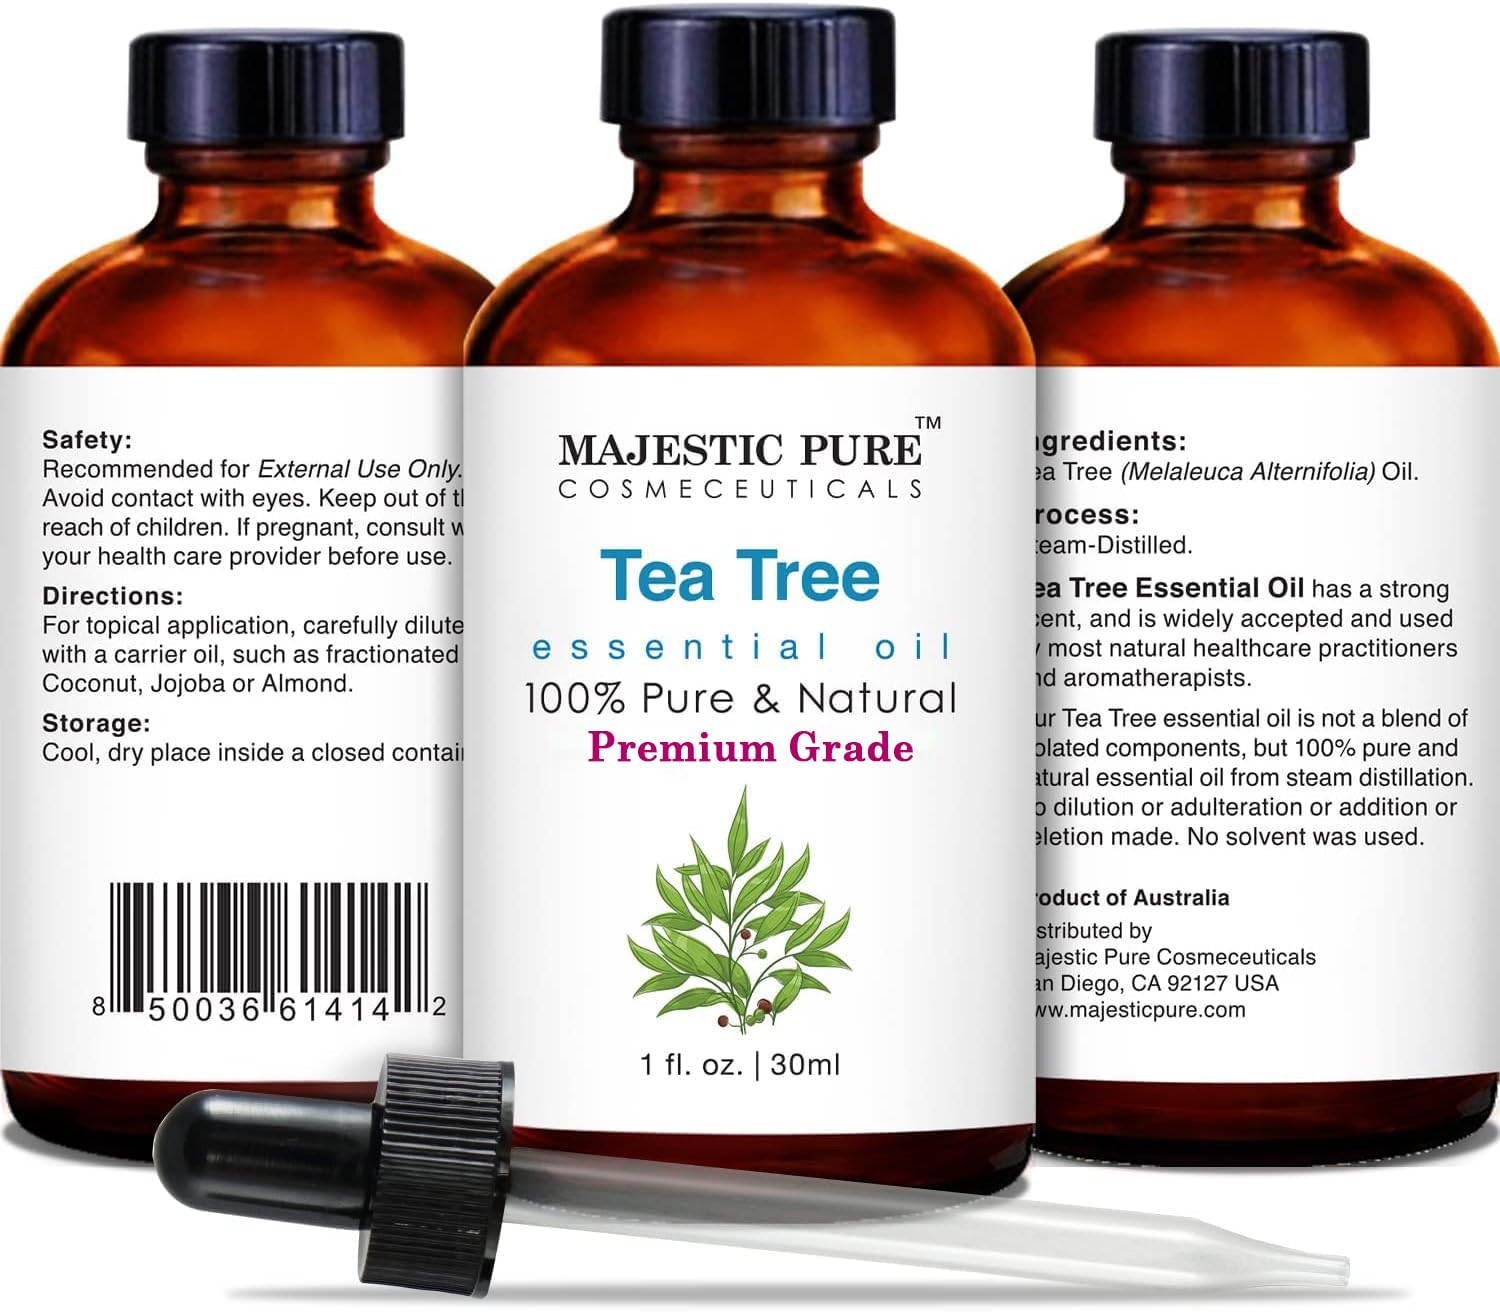 Majestic Pure Tea Tree Essential Oil - Pure, Natural and Premium Grade - Tea Tree Oil for Skin, Face, Hair, Nails, Acne, Scalp, Massage, Aromatherapy, Diffuser, Topical & Household Uses - 1 fl oz : Health & Household